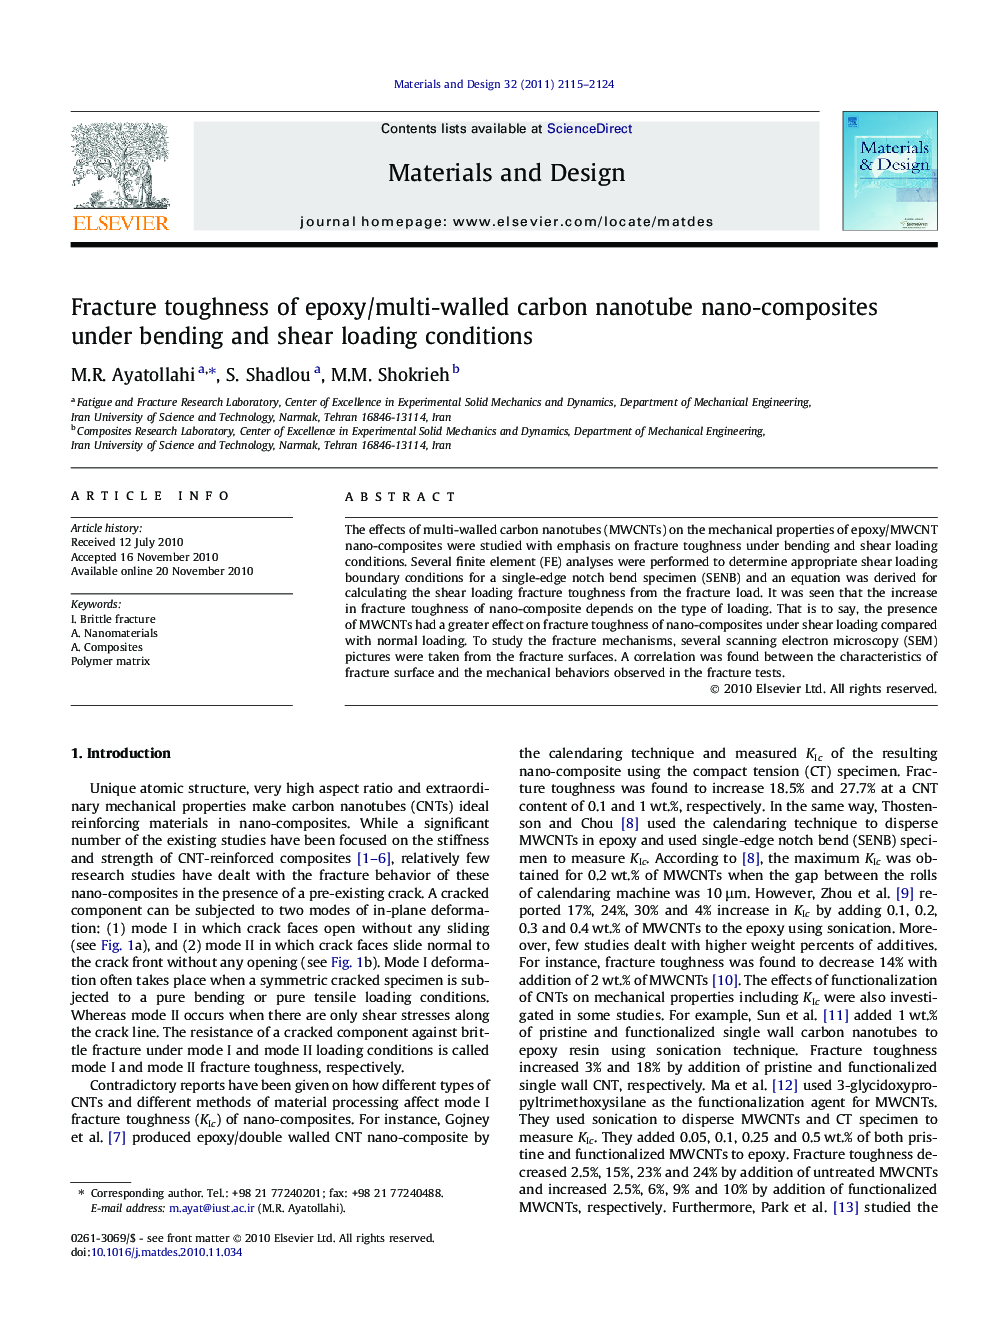 Fracture toughness of epoxy/multi-walled carbon nanotube nano-composites under bending and shear loading conditions